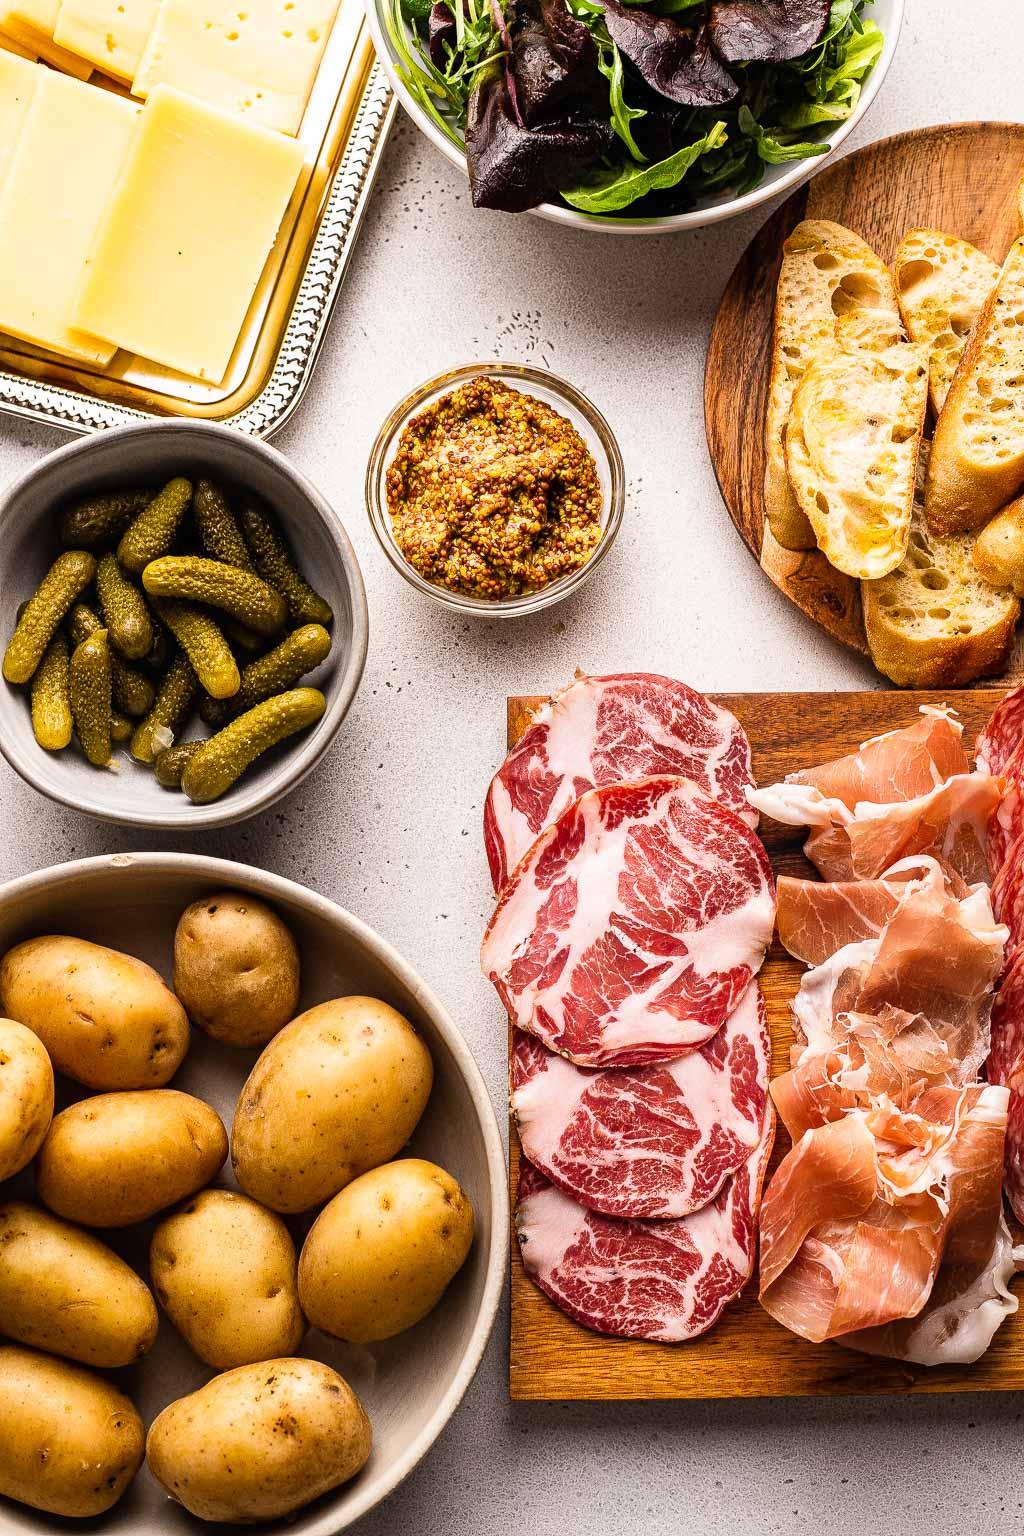 Raclette Dinner - How to Make Raclette at home